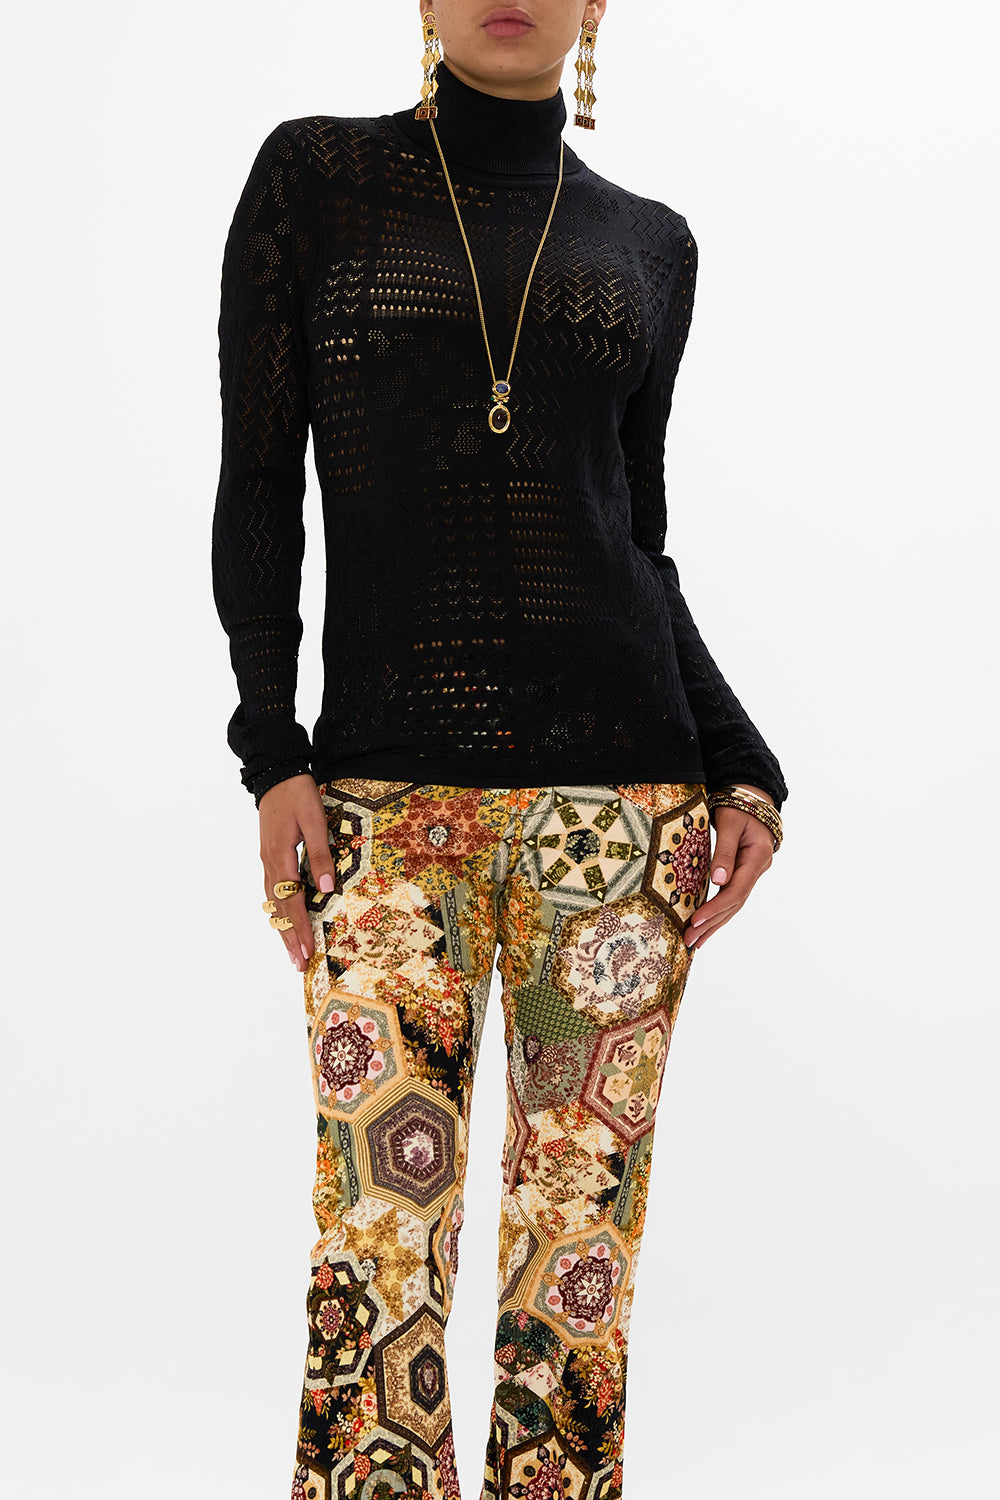 CAMILLA floral pointelle turtle neck knit in Stitched In Time print.